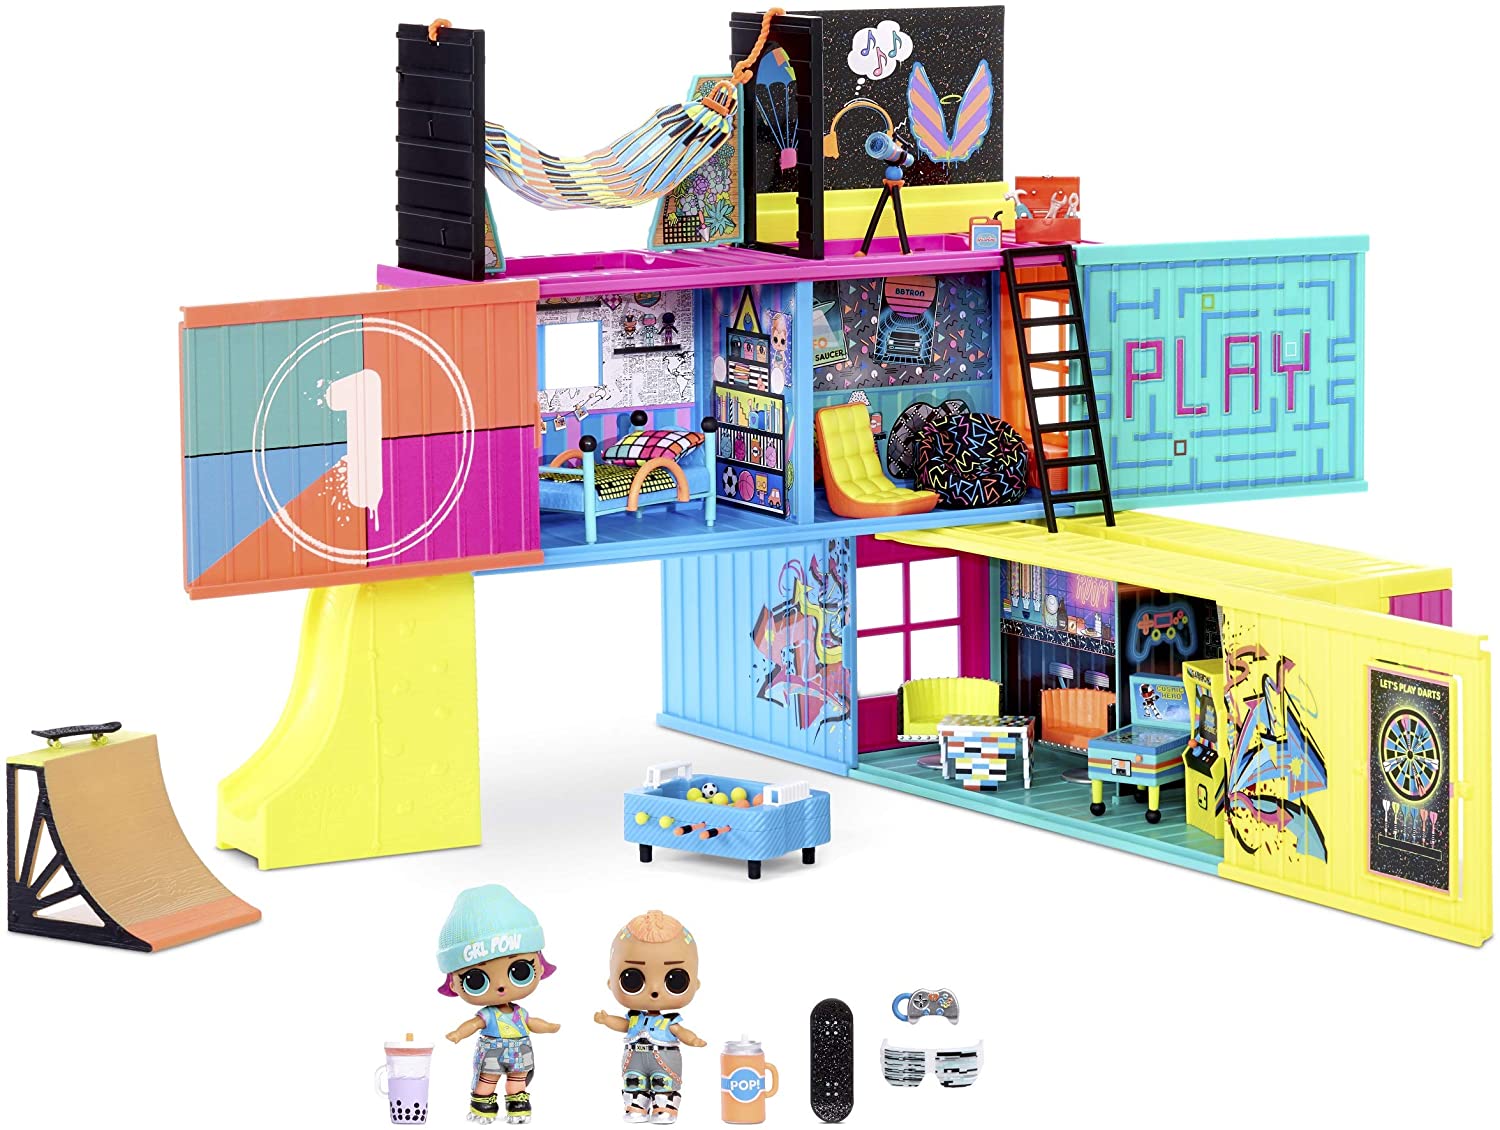 L.O.L. Surprise! Clubhouse Playset w/ 40+ Surprises & 2 Exclusives Dolls $28 + Free Shipping